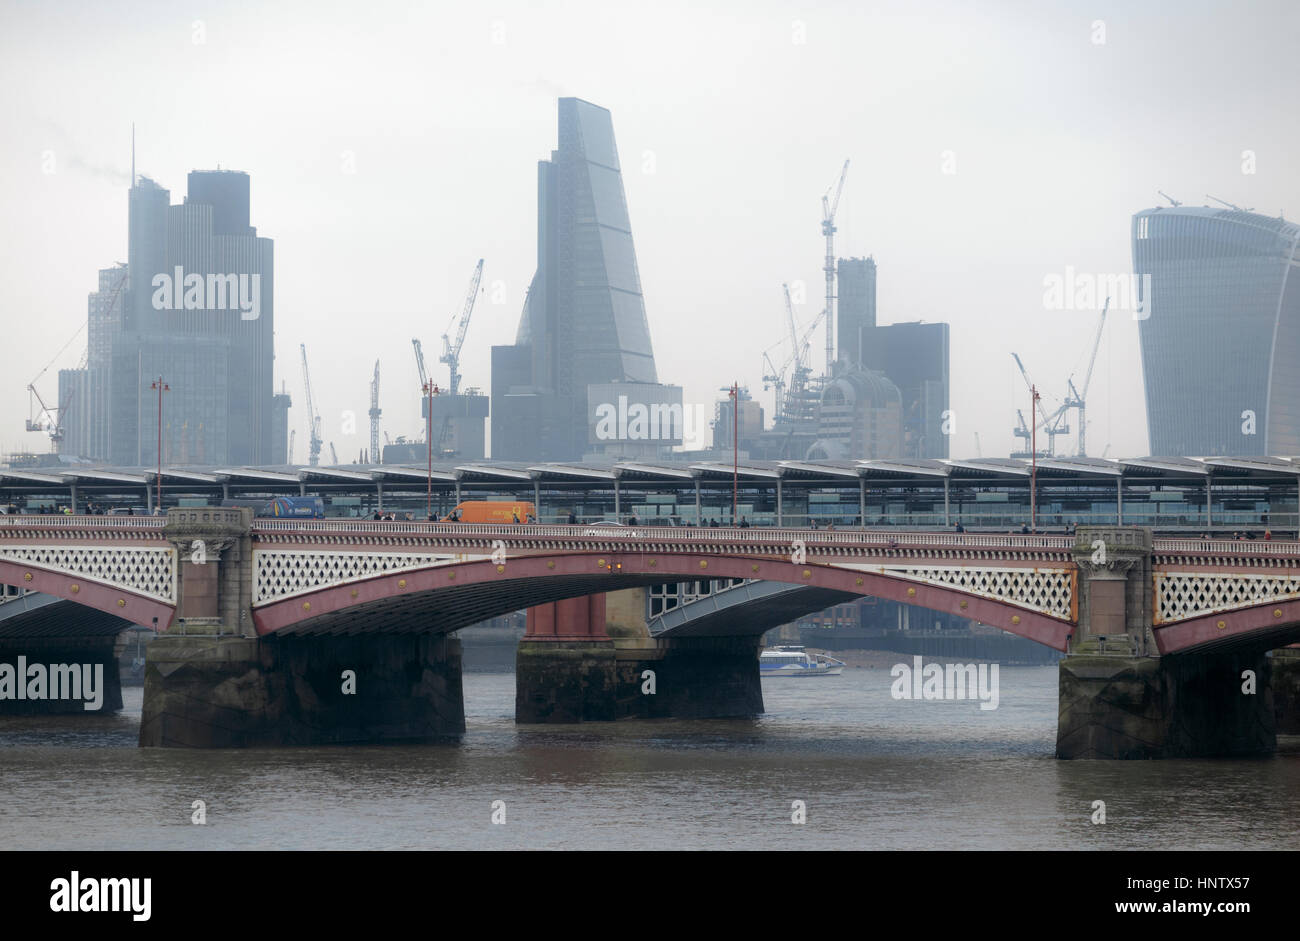 Tower 42, Cheesegrater, Walkie Talkie, iconic skyscrapers on the City of London financial district skyline and Blackfriars Bridge on a dreary morning Stock Photo